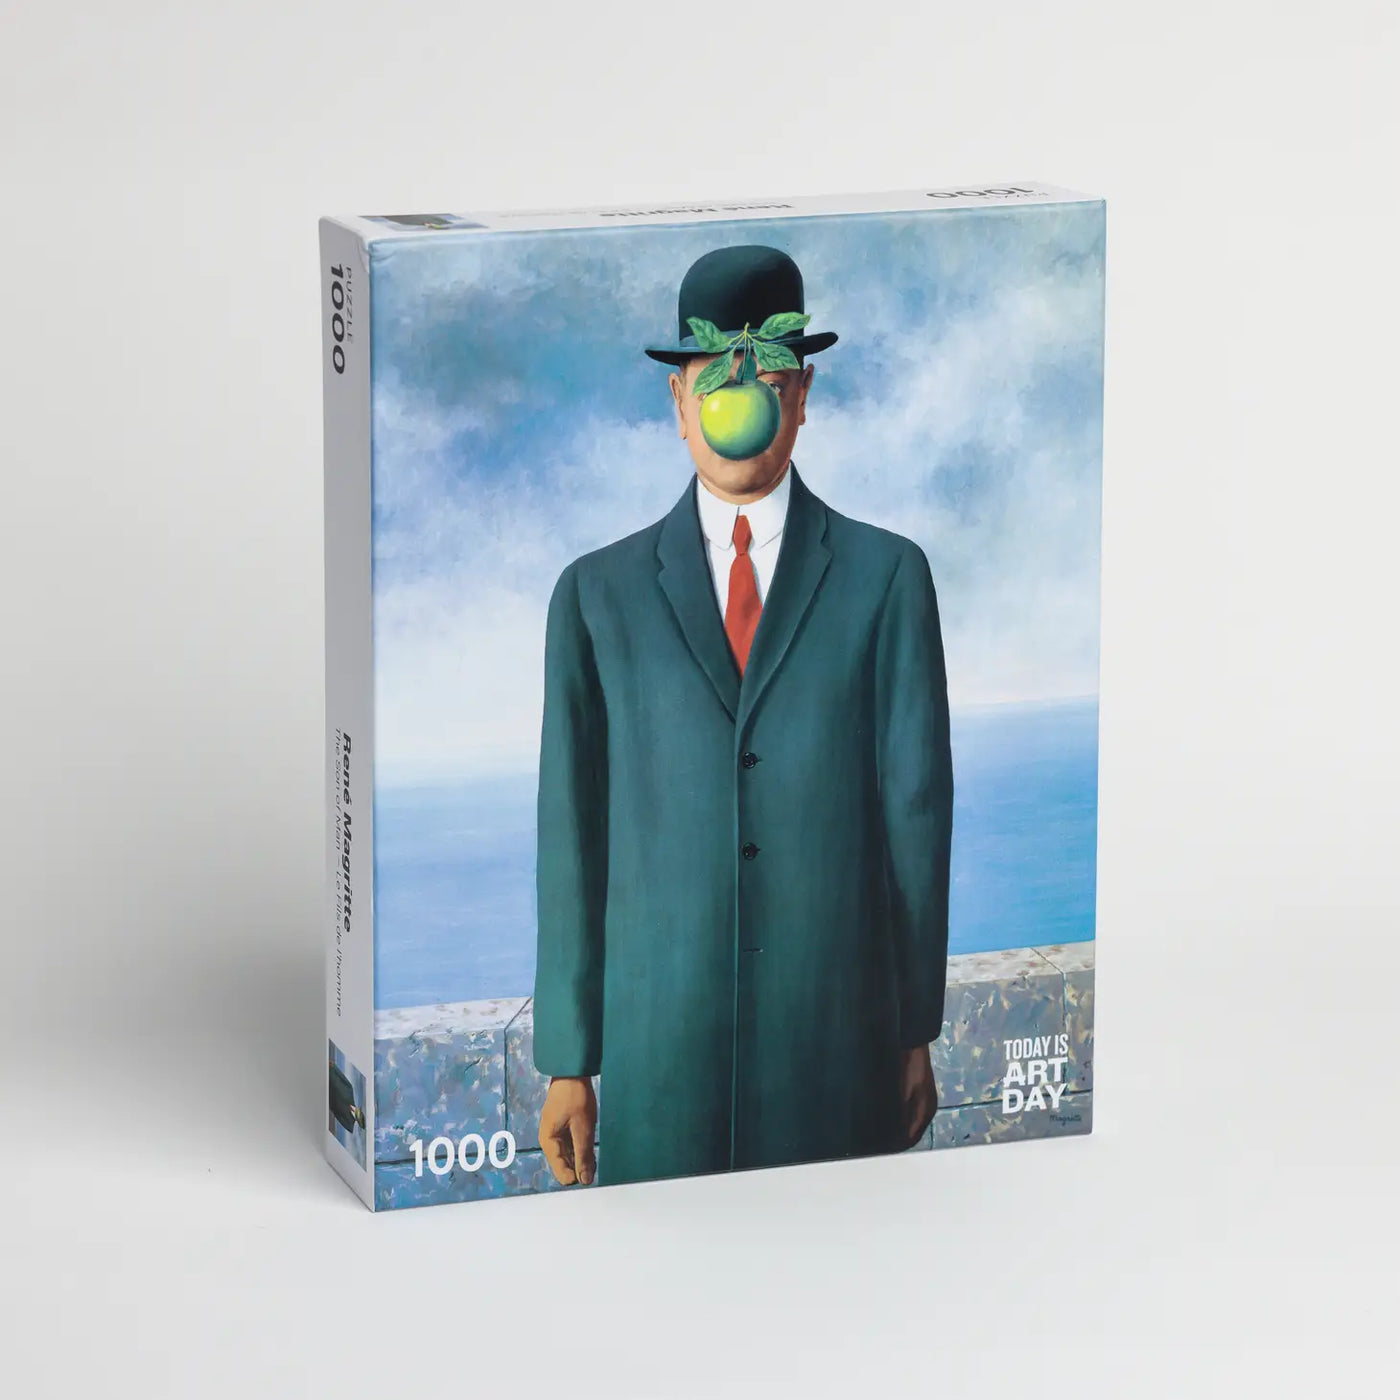 René Magritte - Son of Man Puzzle Did you know: This painting was a featured element in the plot of the 1999 movie (remake), The Thomas Crown Affair, with Pierce Brosnan and Rene Russo. If you're an art lover - you MUST watch it!